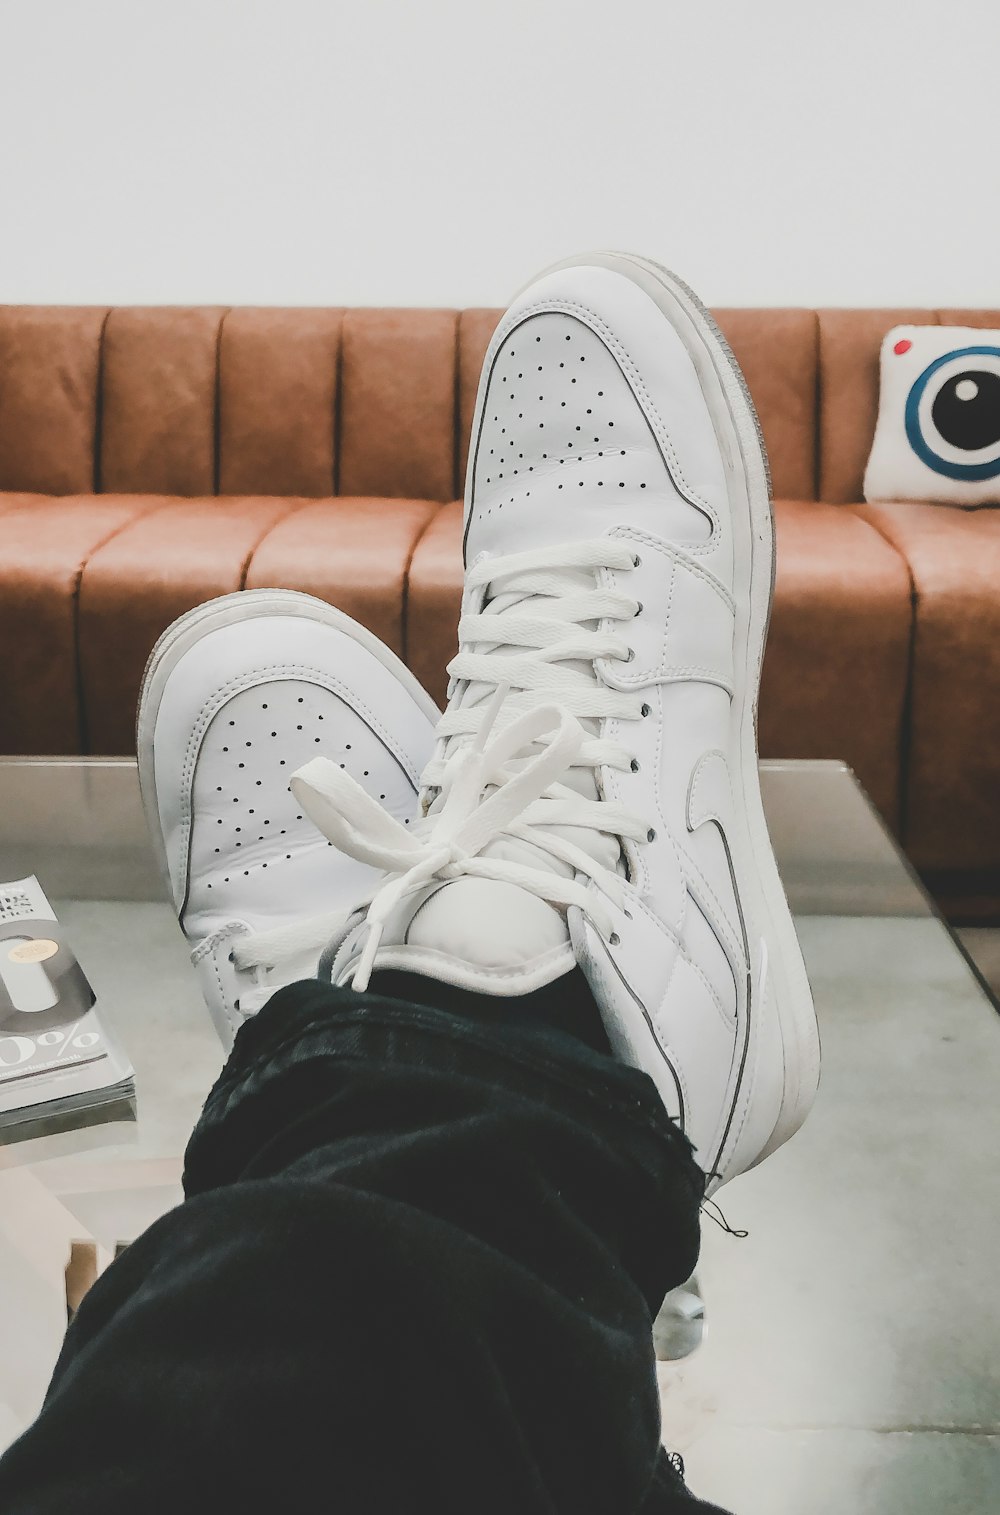 person wearing white nike air force 1 photo – Free Sandy Image on Unsplash